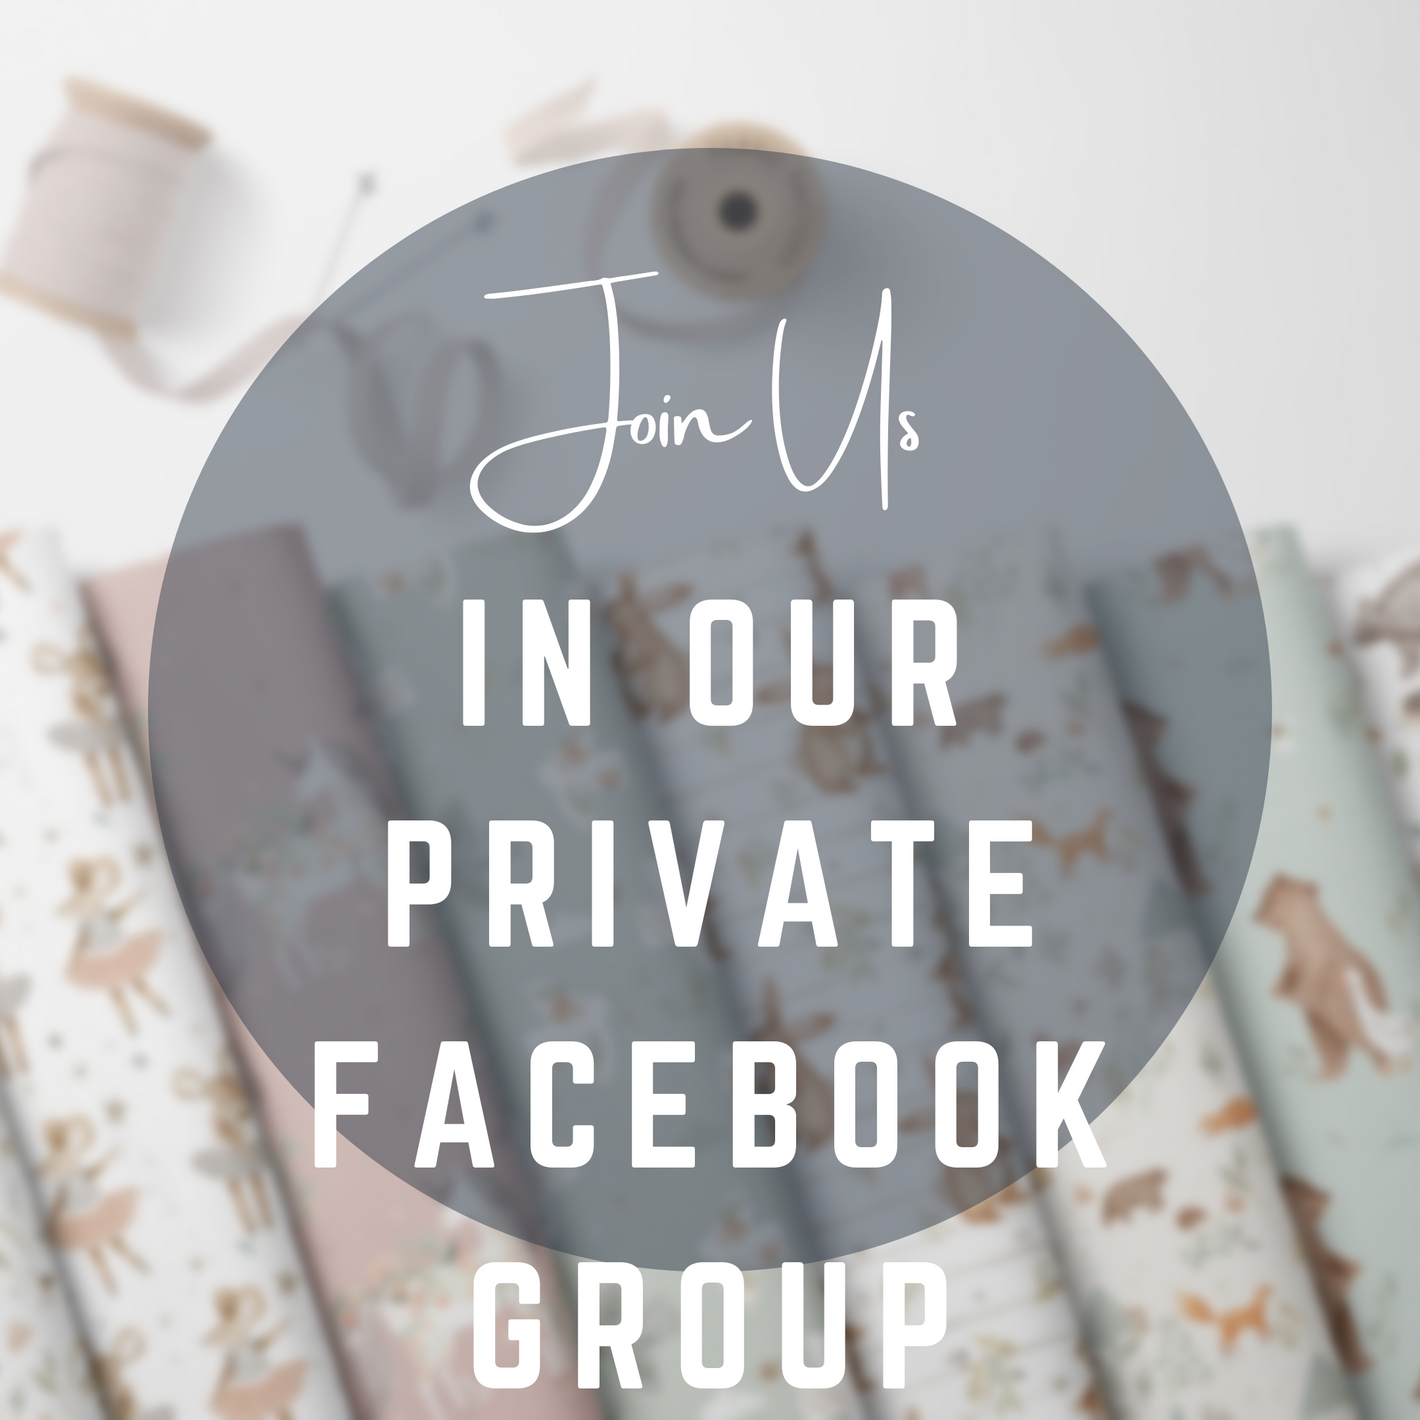 Join our private group on Facebook